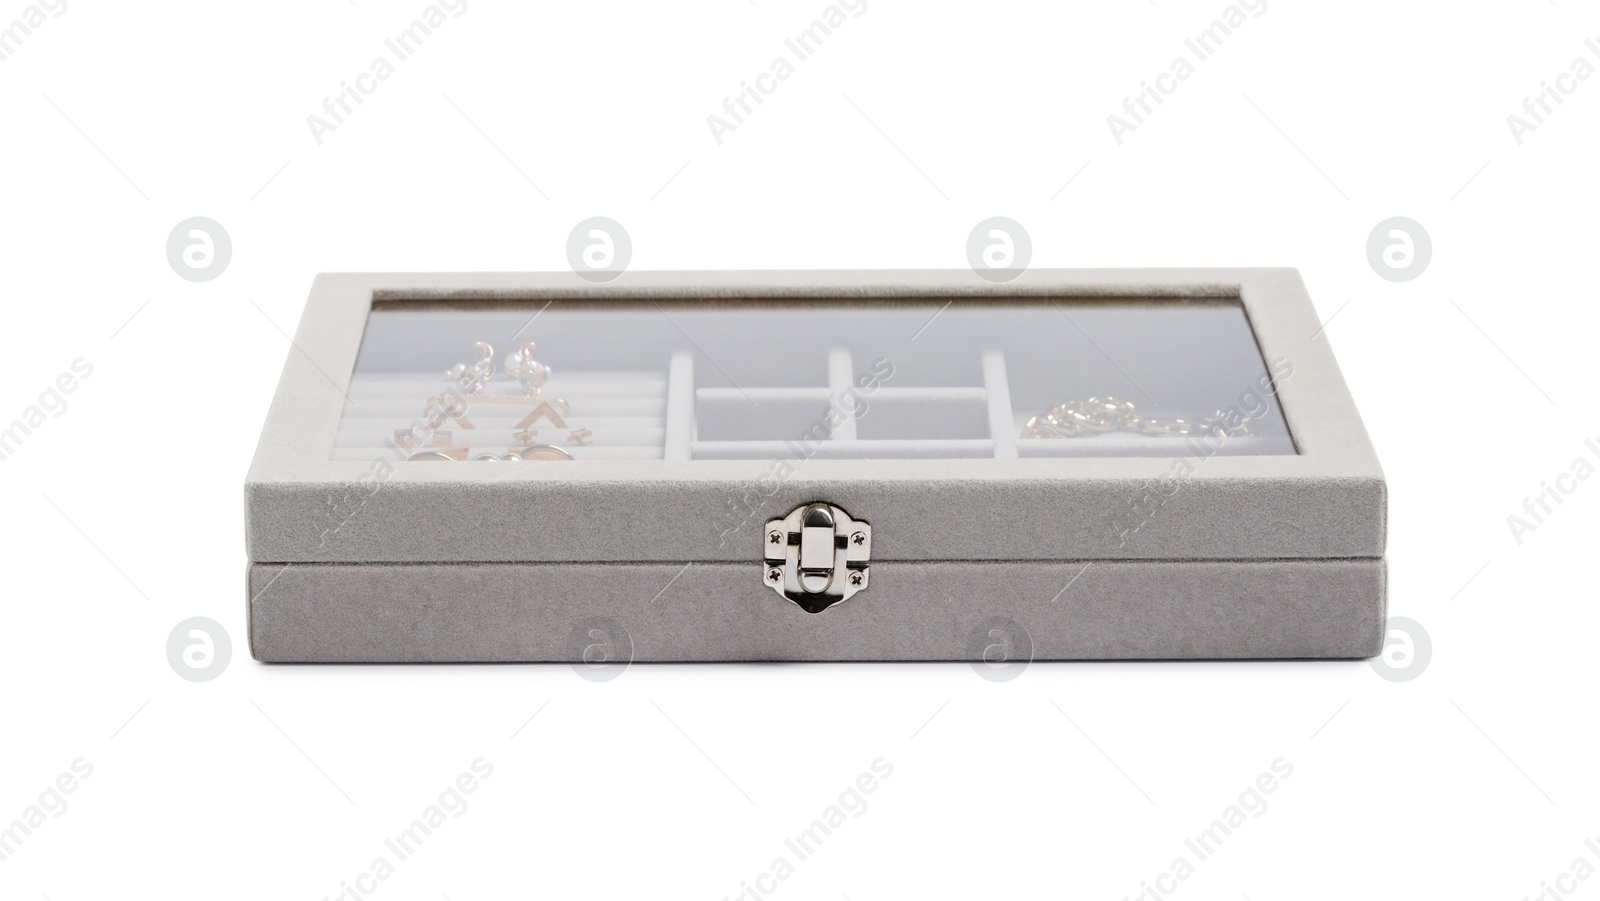 Photo of Jewelry box with many different golden accessories isolated on white